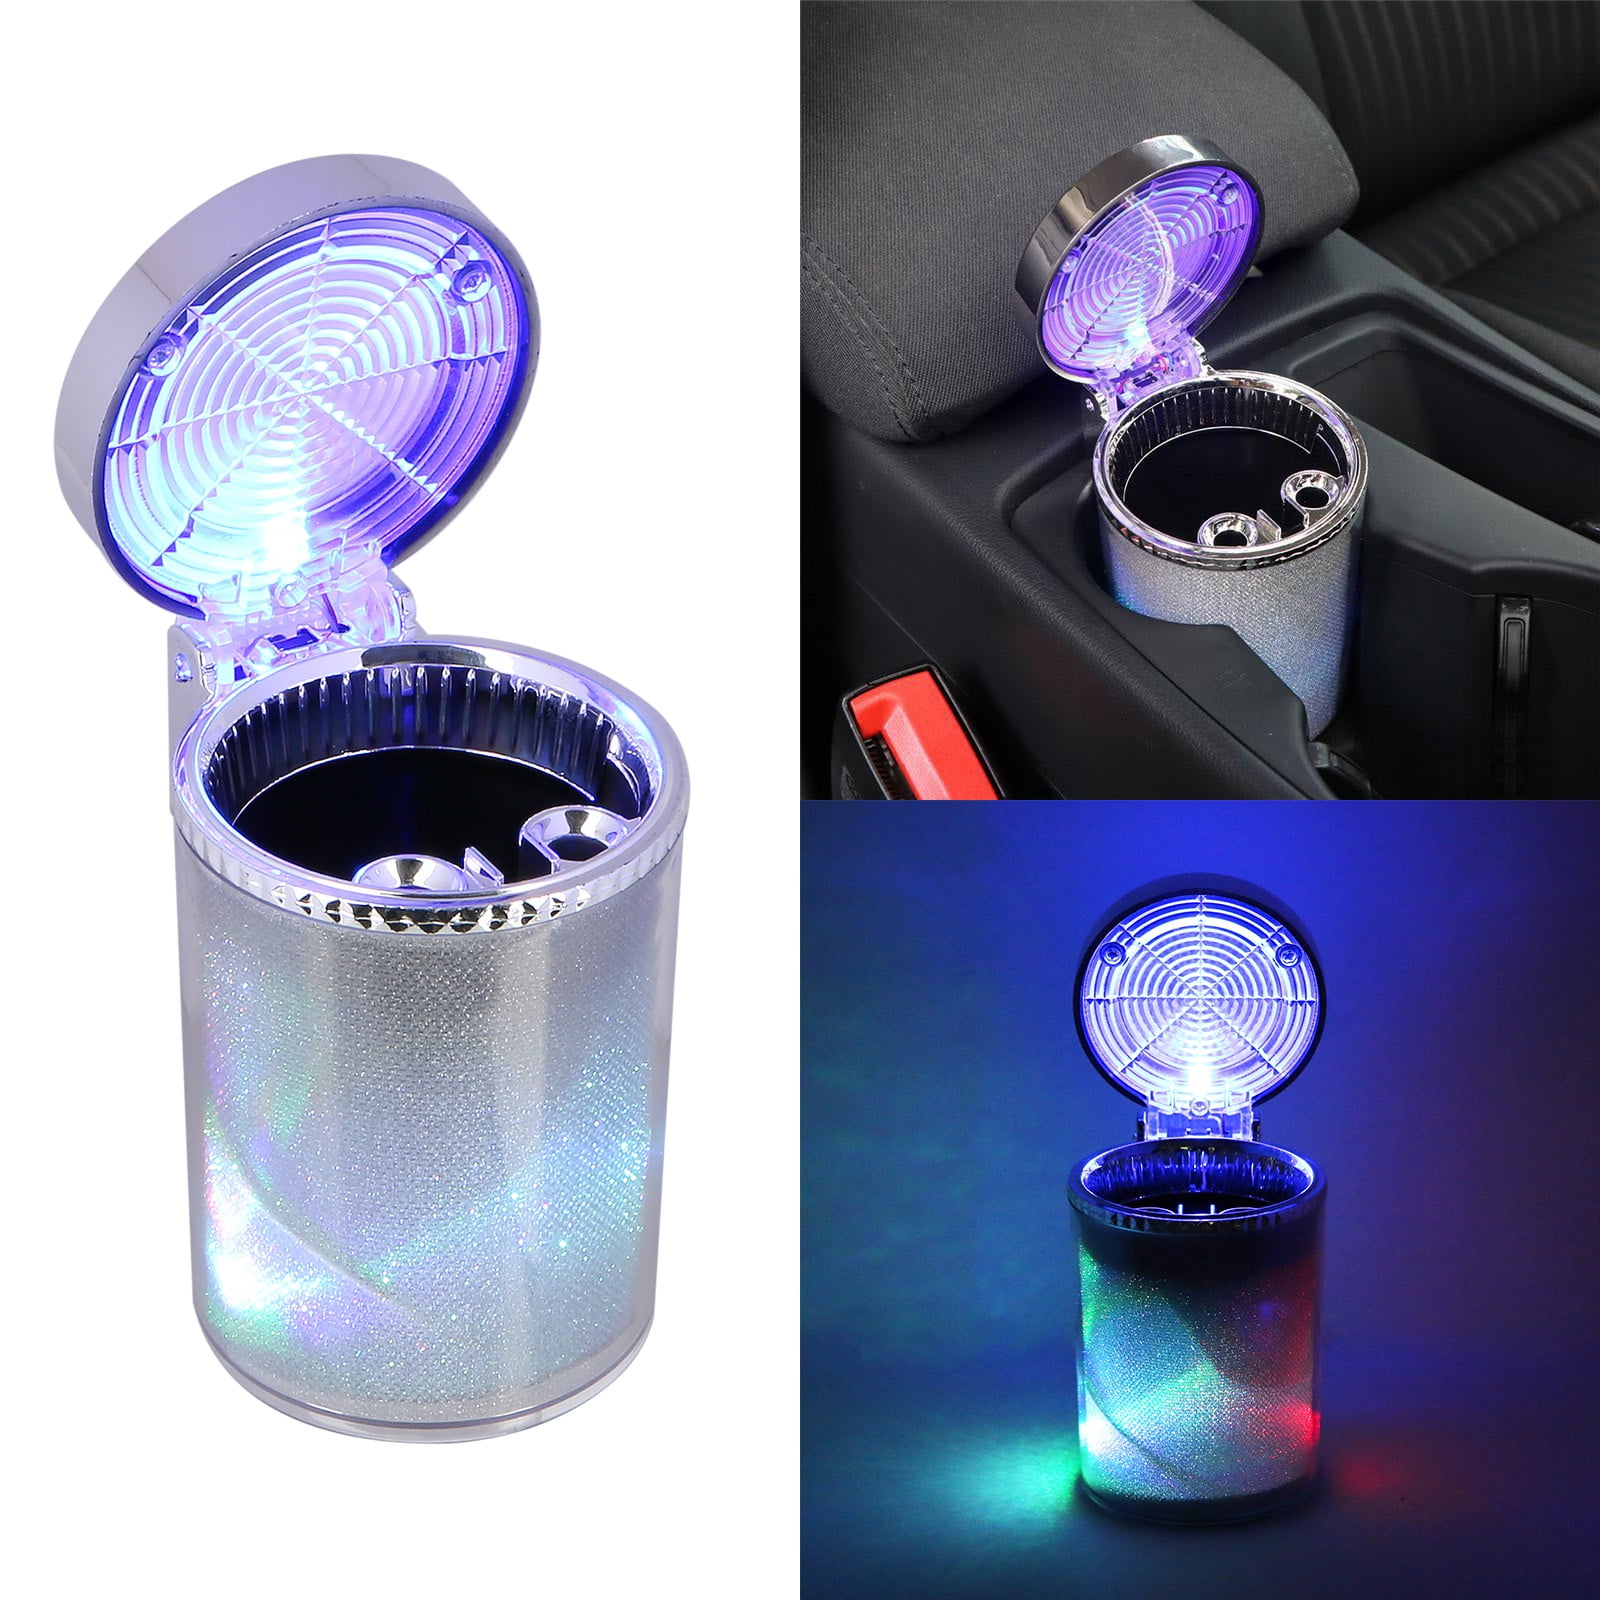 CLFYOU Auto Car Ashtray Portable Travel Car Ashtray with Lids and LED Light Desktop Smoking Ash Tray Cylinder Cup Holder for Car Vehicle Office Home 